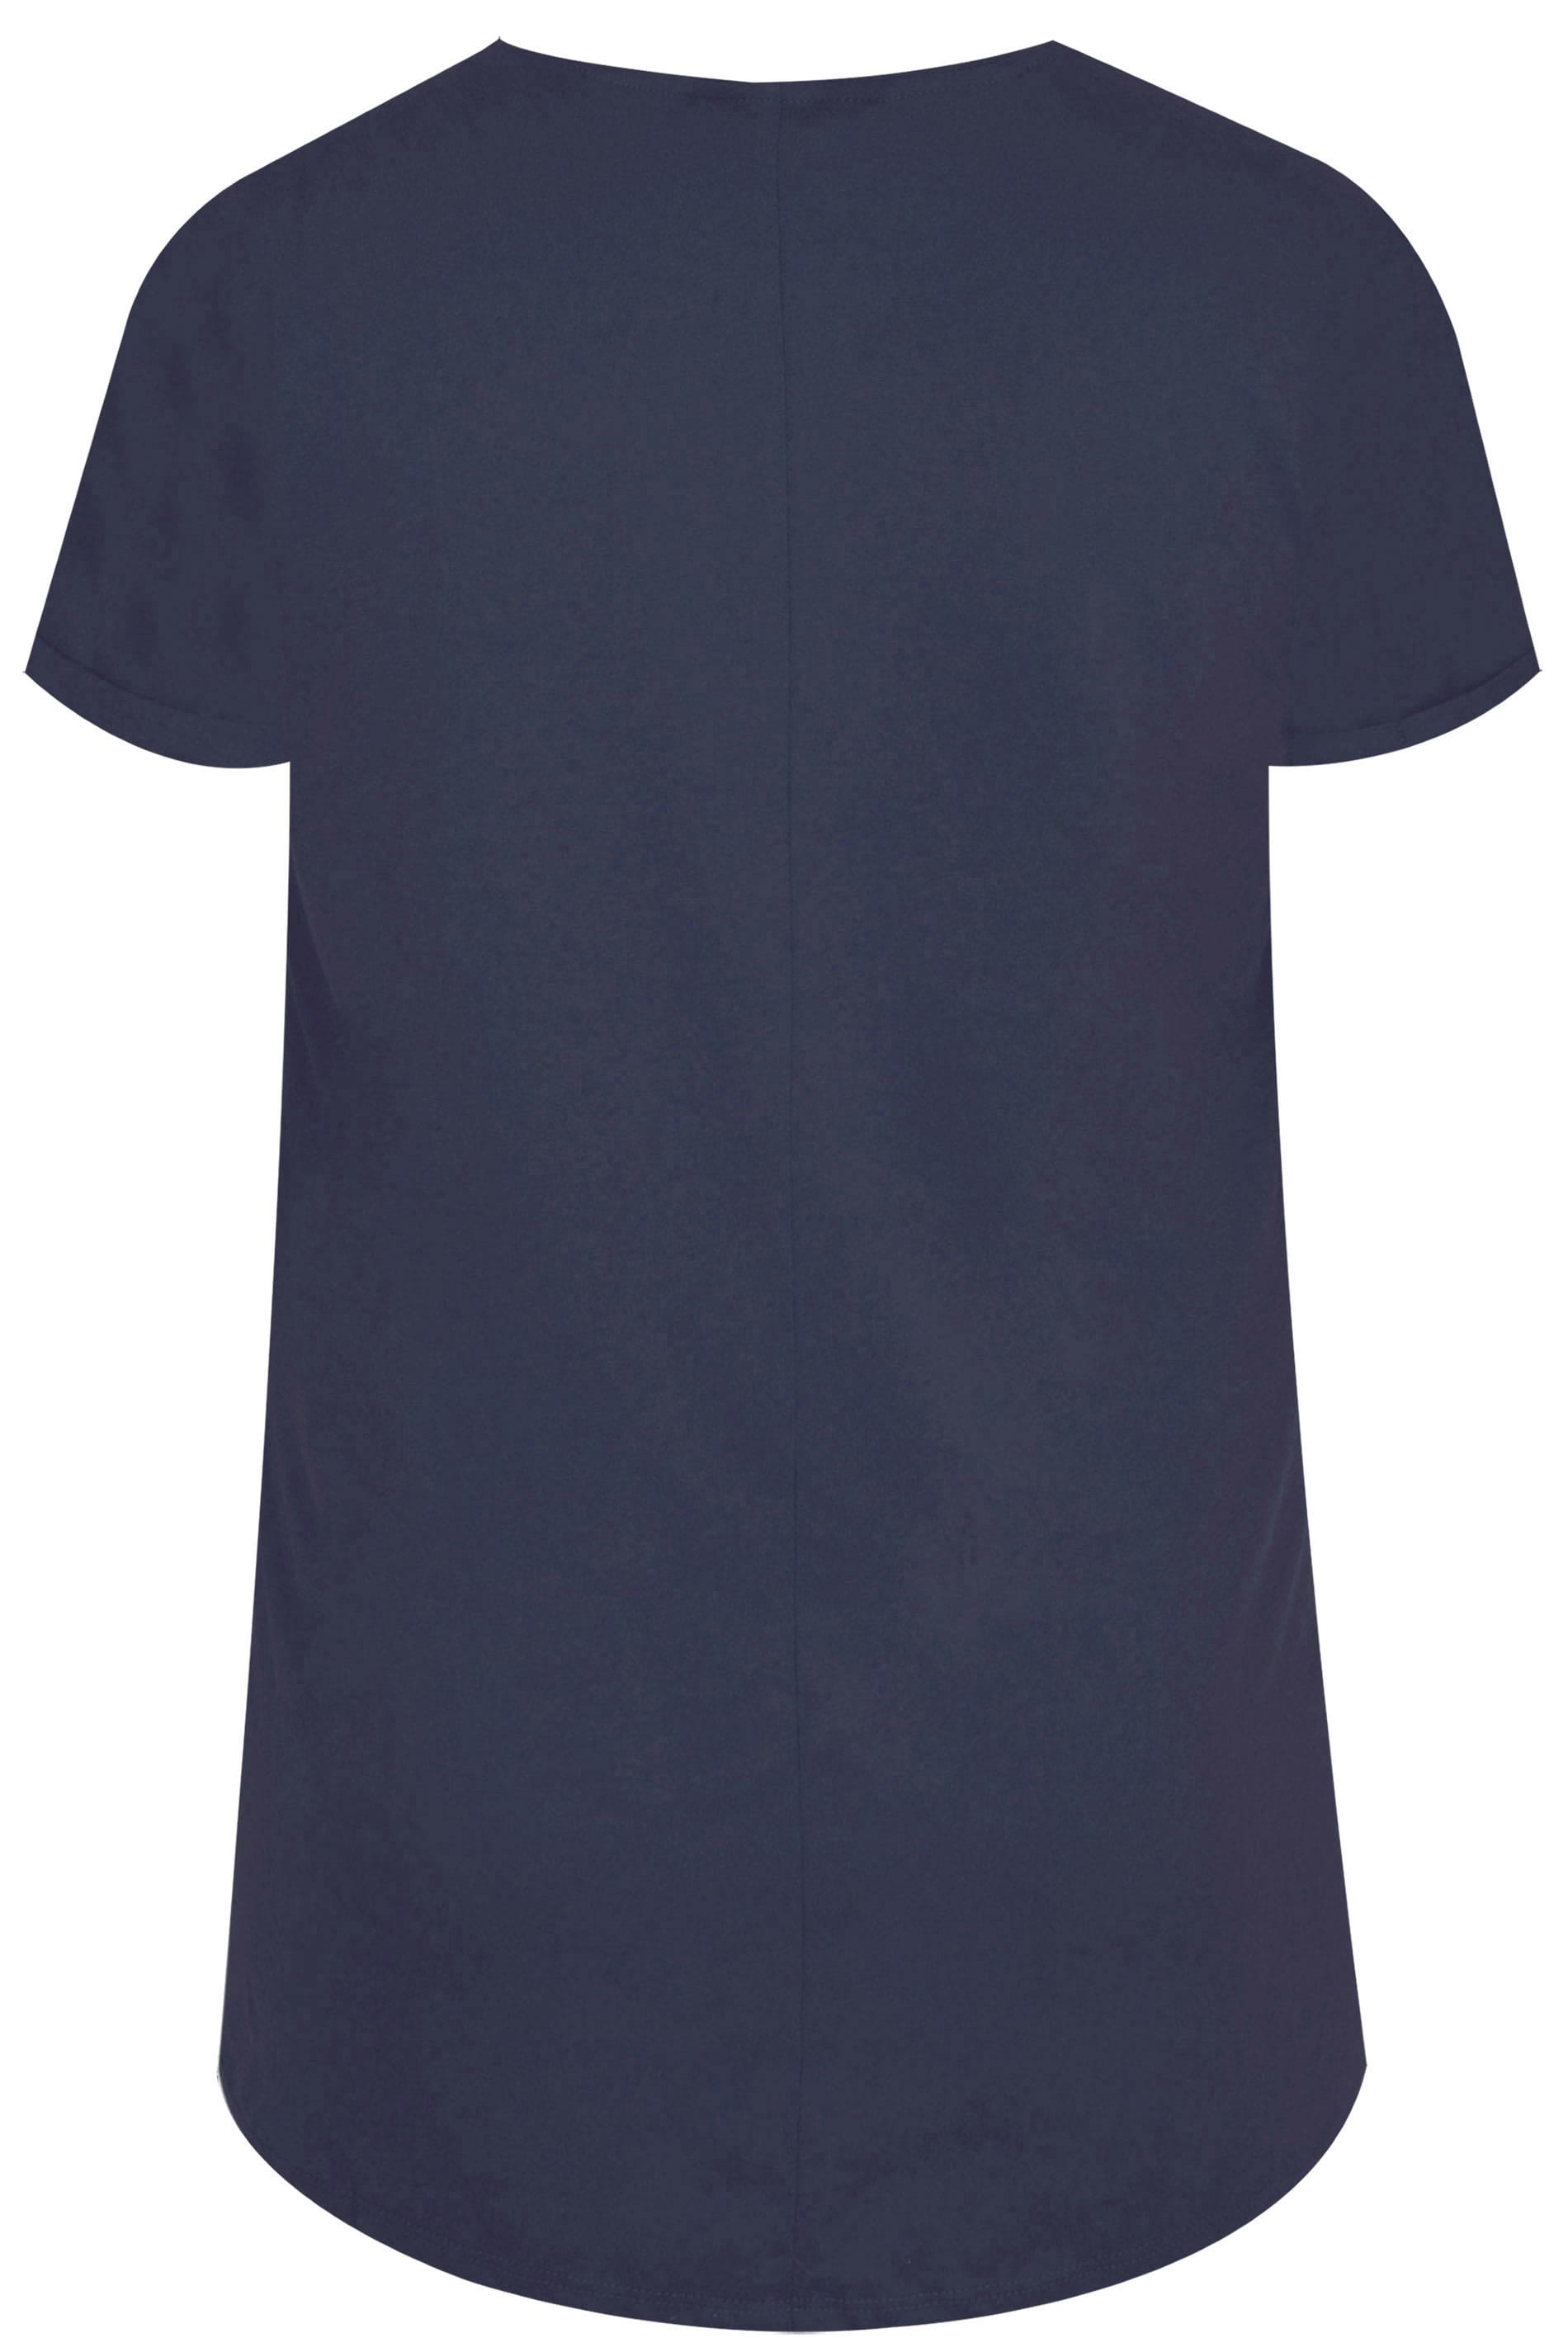 Grande taille  Tops Grande taille  T-Shirts | T-Shirt Bleu Marine Col Rond - SX19738